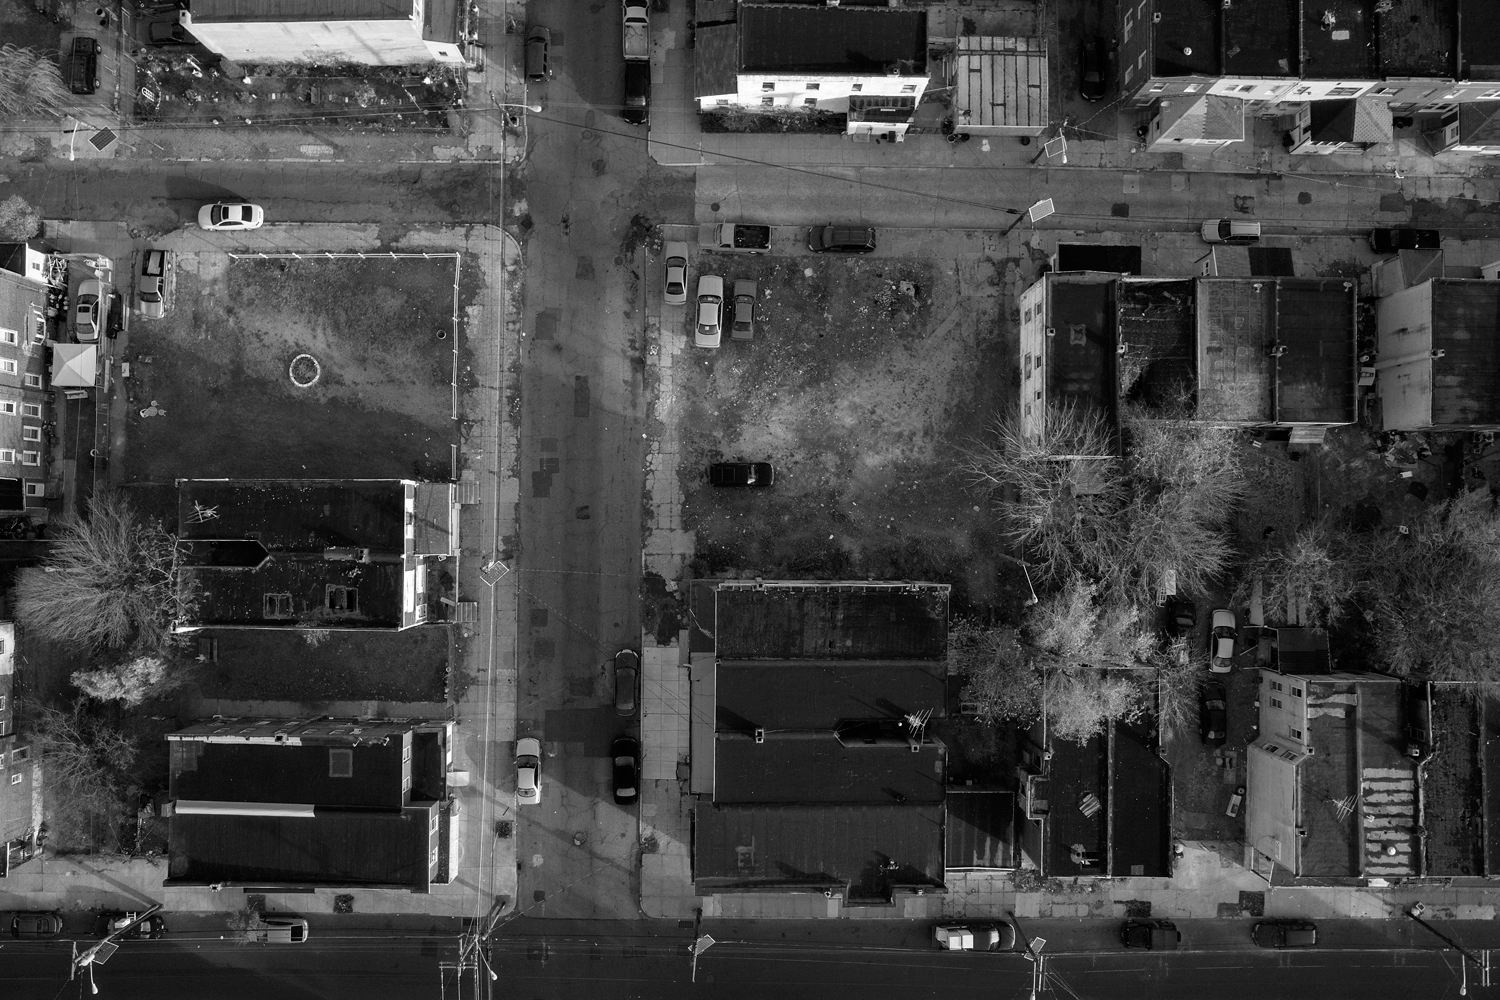 A run-down neighborhood appears in North Camden, New Jersey on November 23, 2014. In 2012, the FBI ranked Camden as having the most violent crime per capita of any American city with a population of over 50,000. The local police installed millions of dollars of surveillance equipment  in residential neighborhoods, including cameras and microphones that detect the exact location of gunshots.